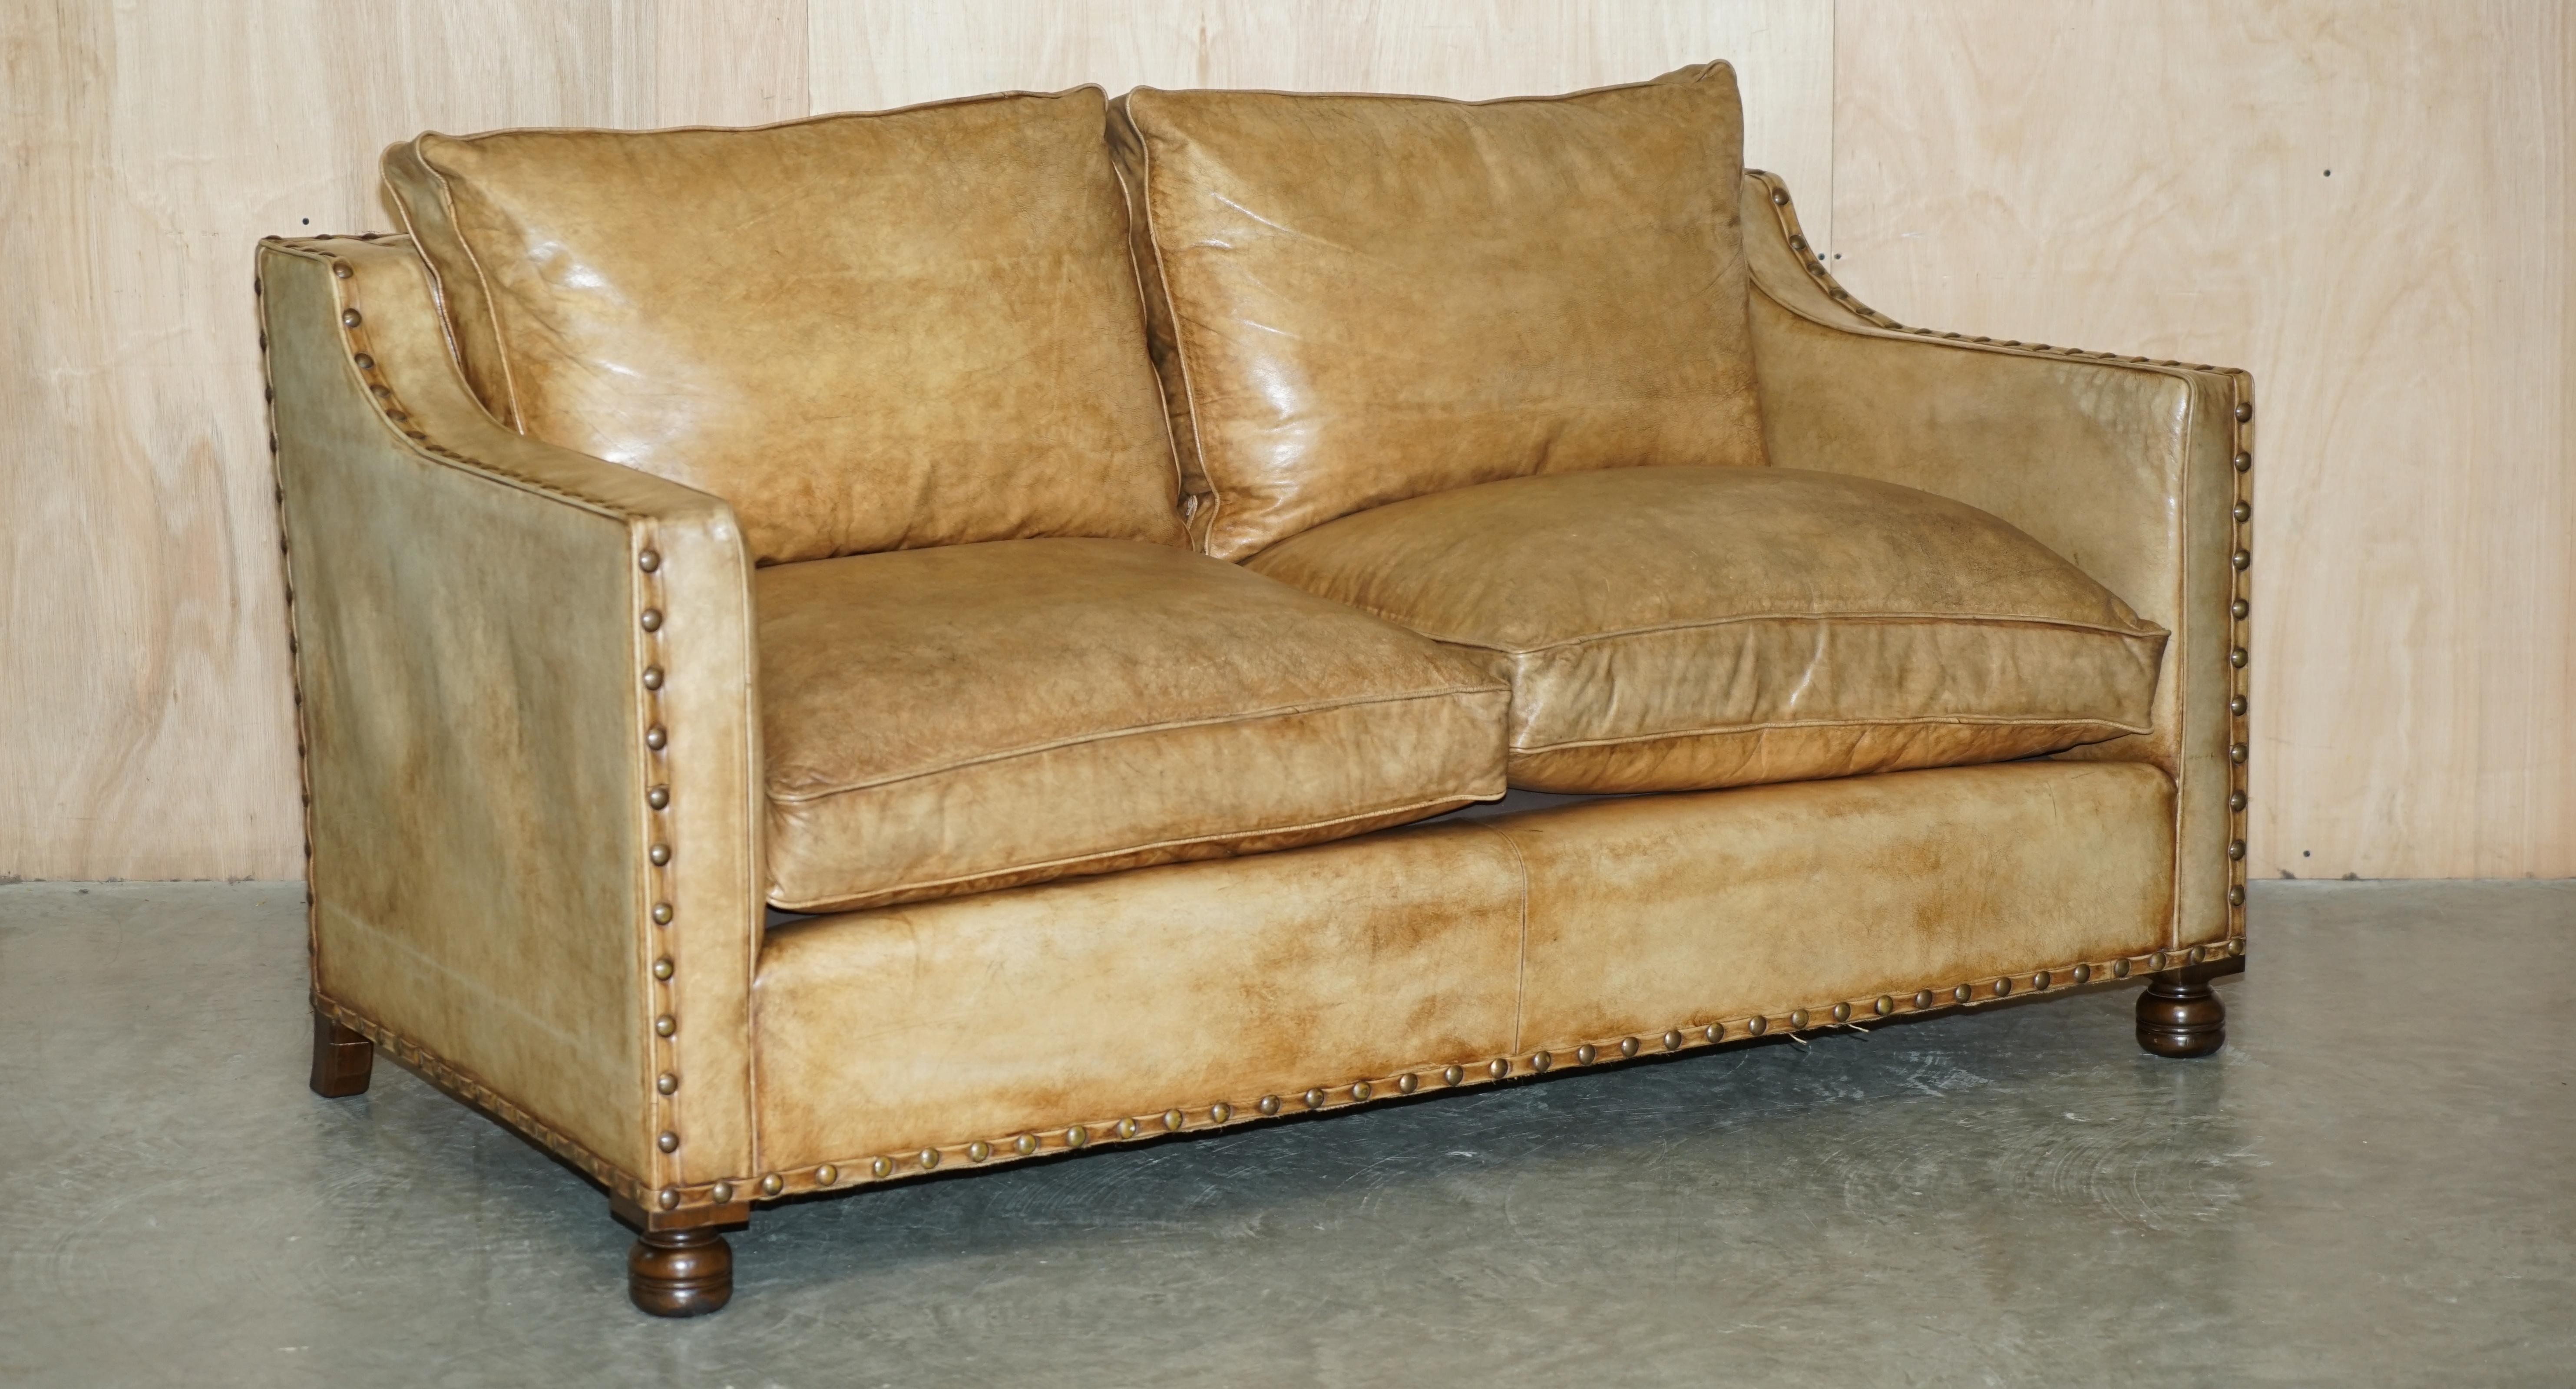 We are delighted to offer for sale this lovely hand dyed tan brown leather two seat sofa with ornate stud work all over.

The sofa is well made and stylish, the leather is fully aniline cattle hide so it has a thick natural look, its then hand